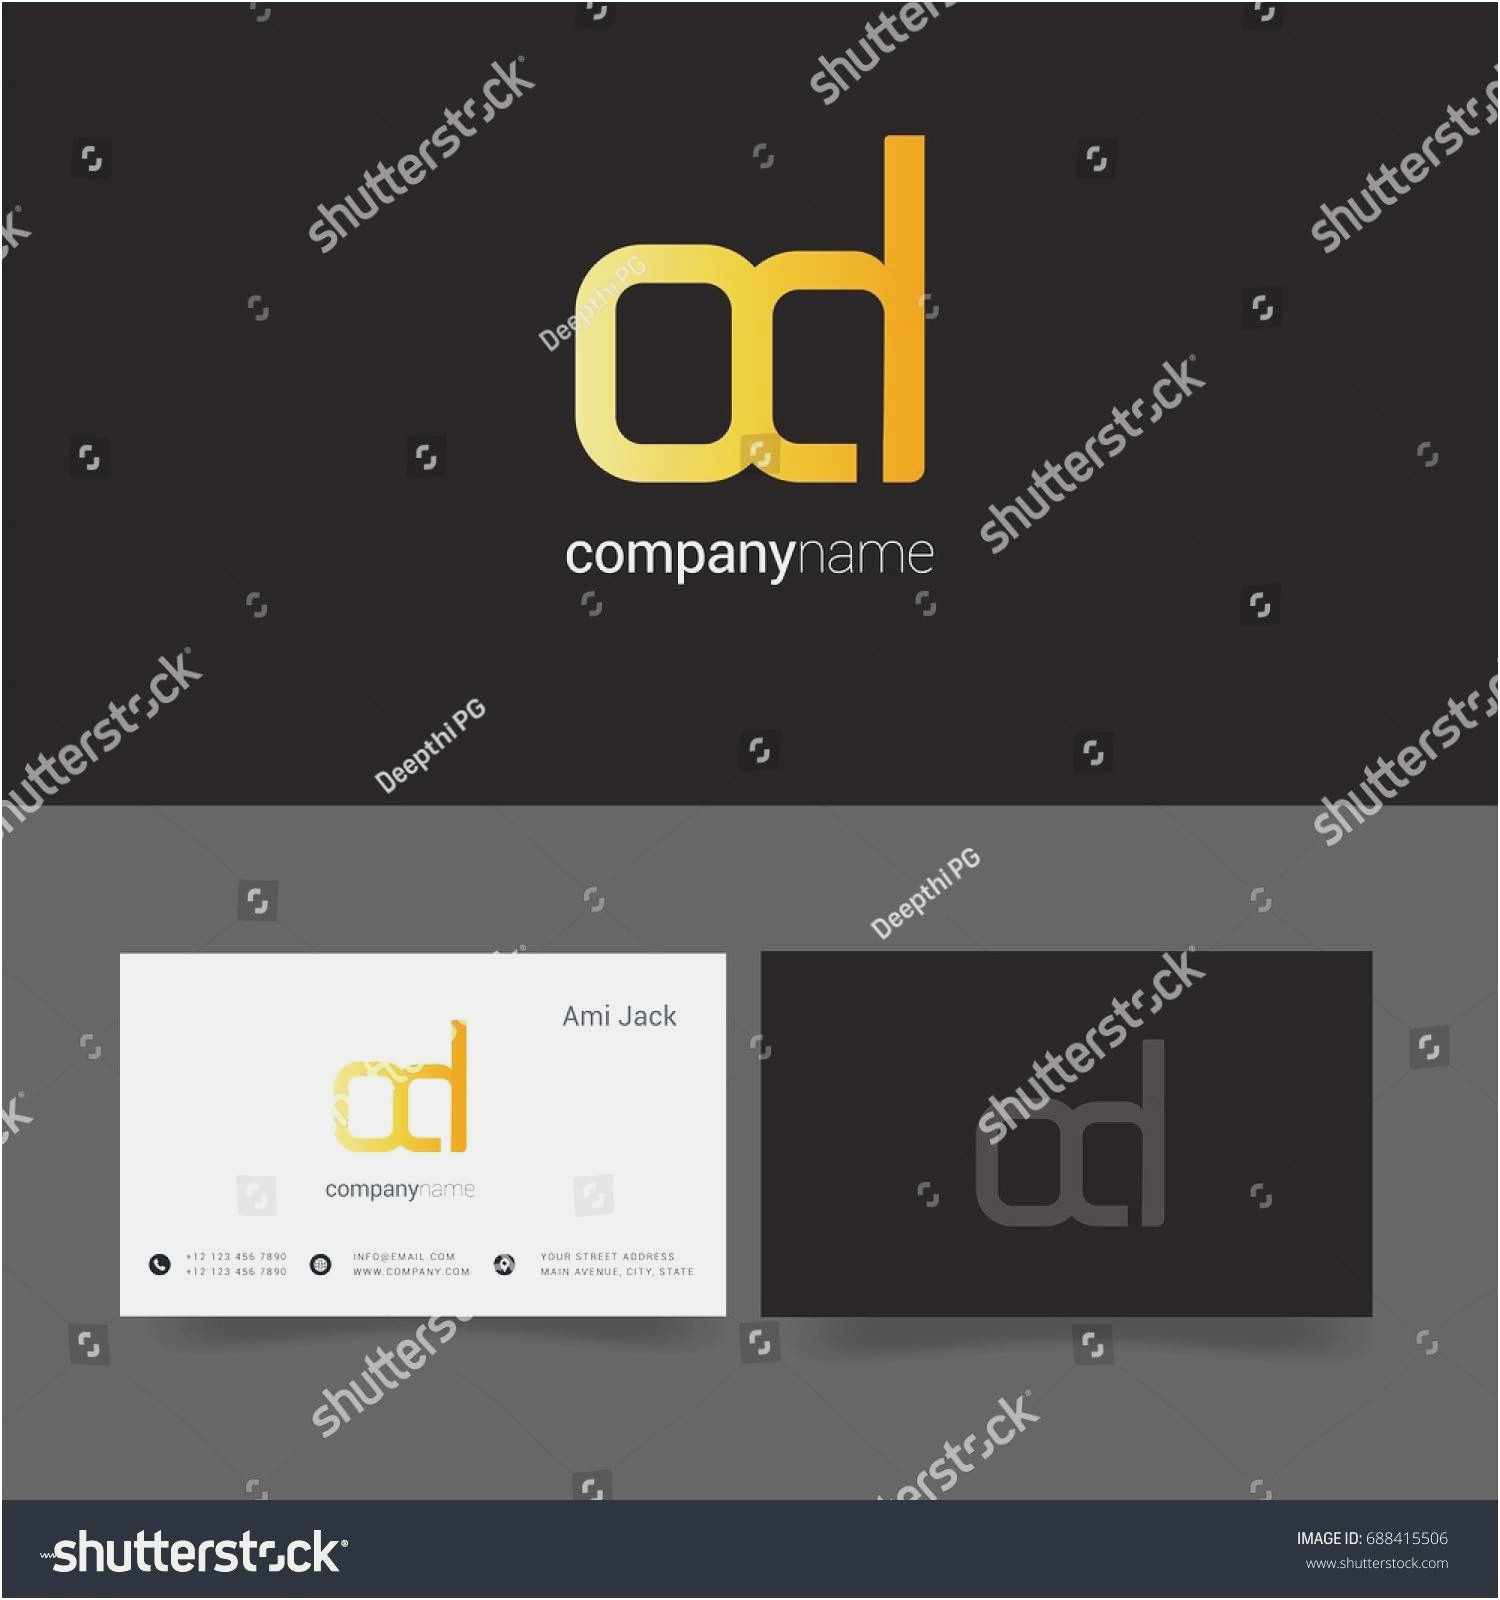 Free 56 P Card Template Download Of Business Card Templates Download